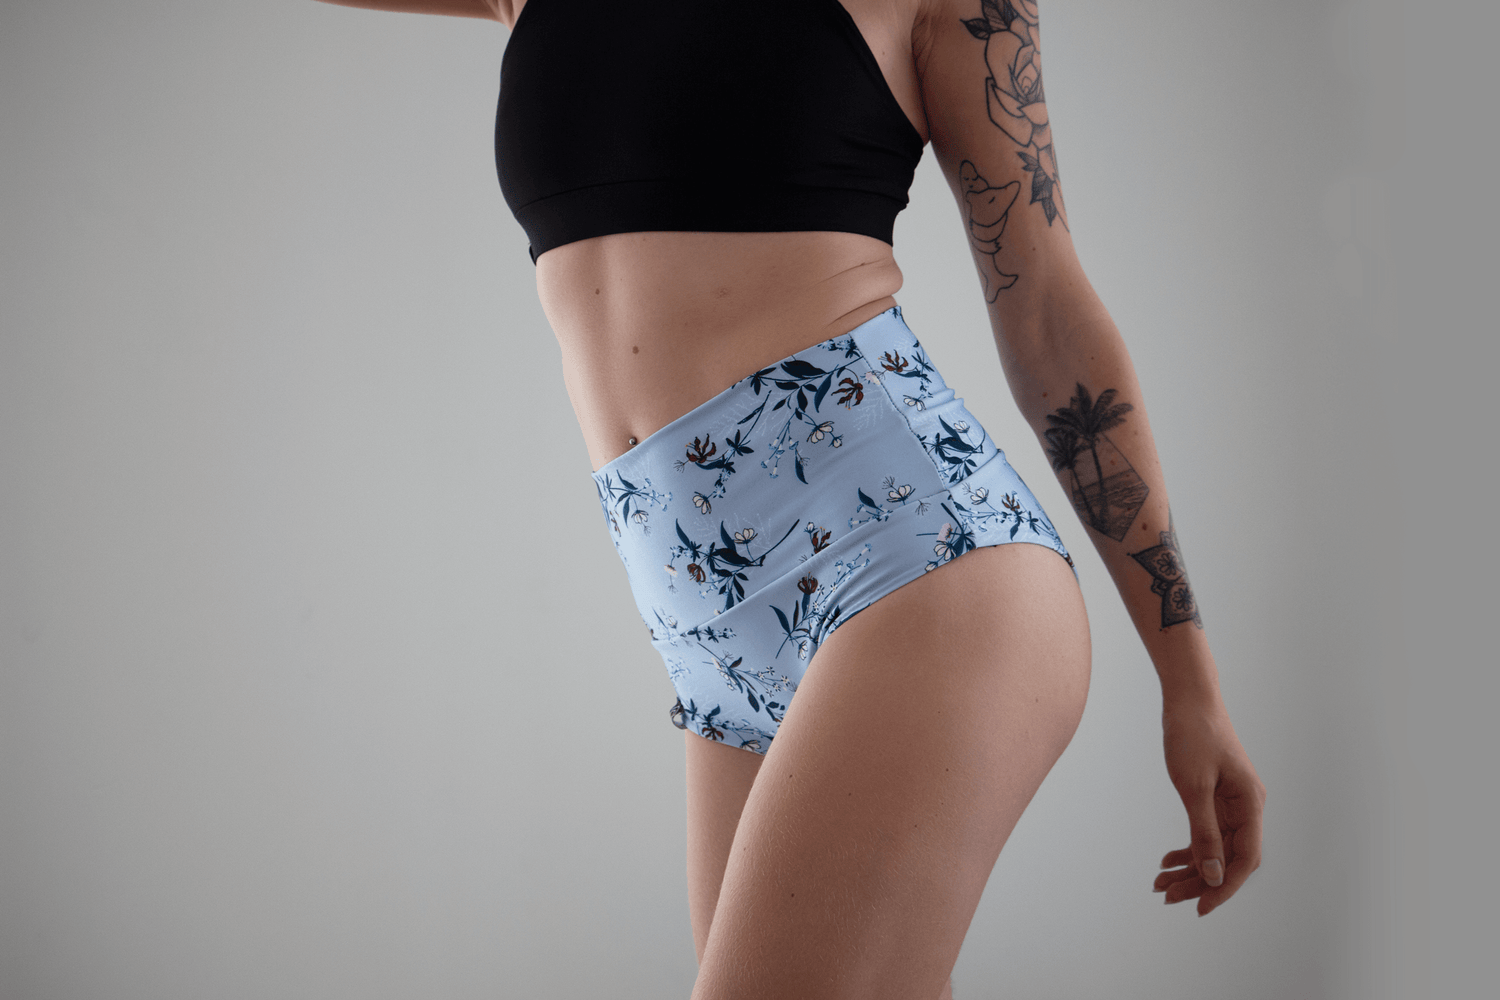 high waisted pole shorts with blue floral print from APEX polewear